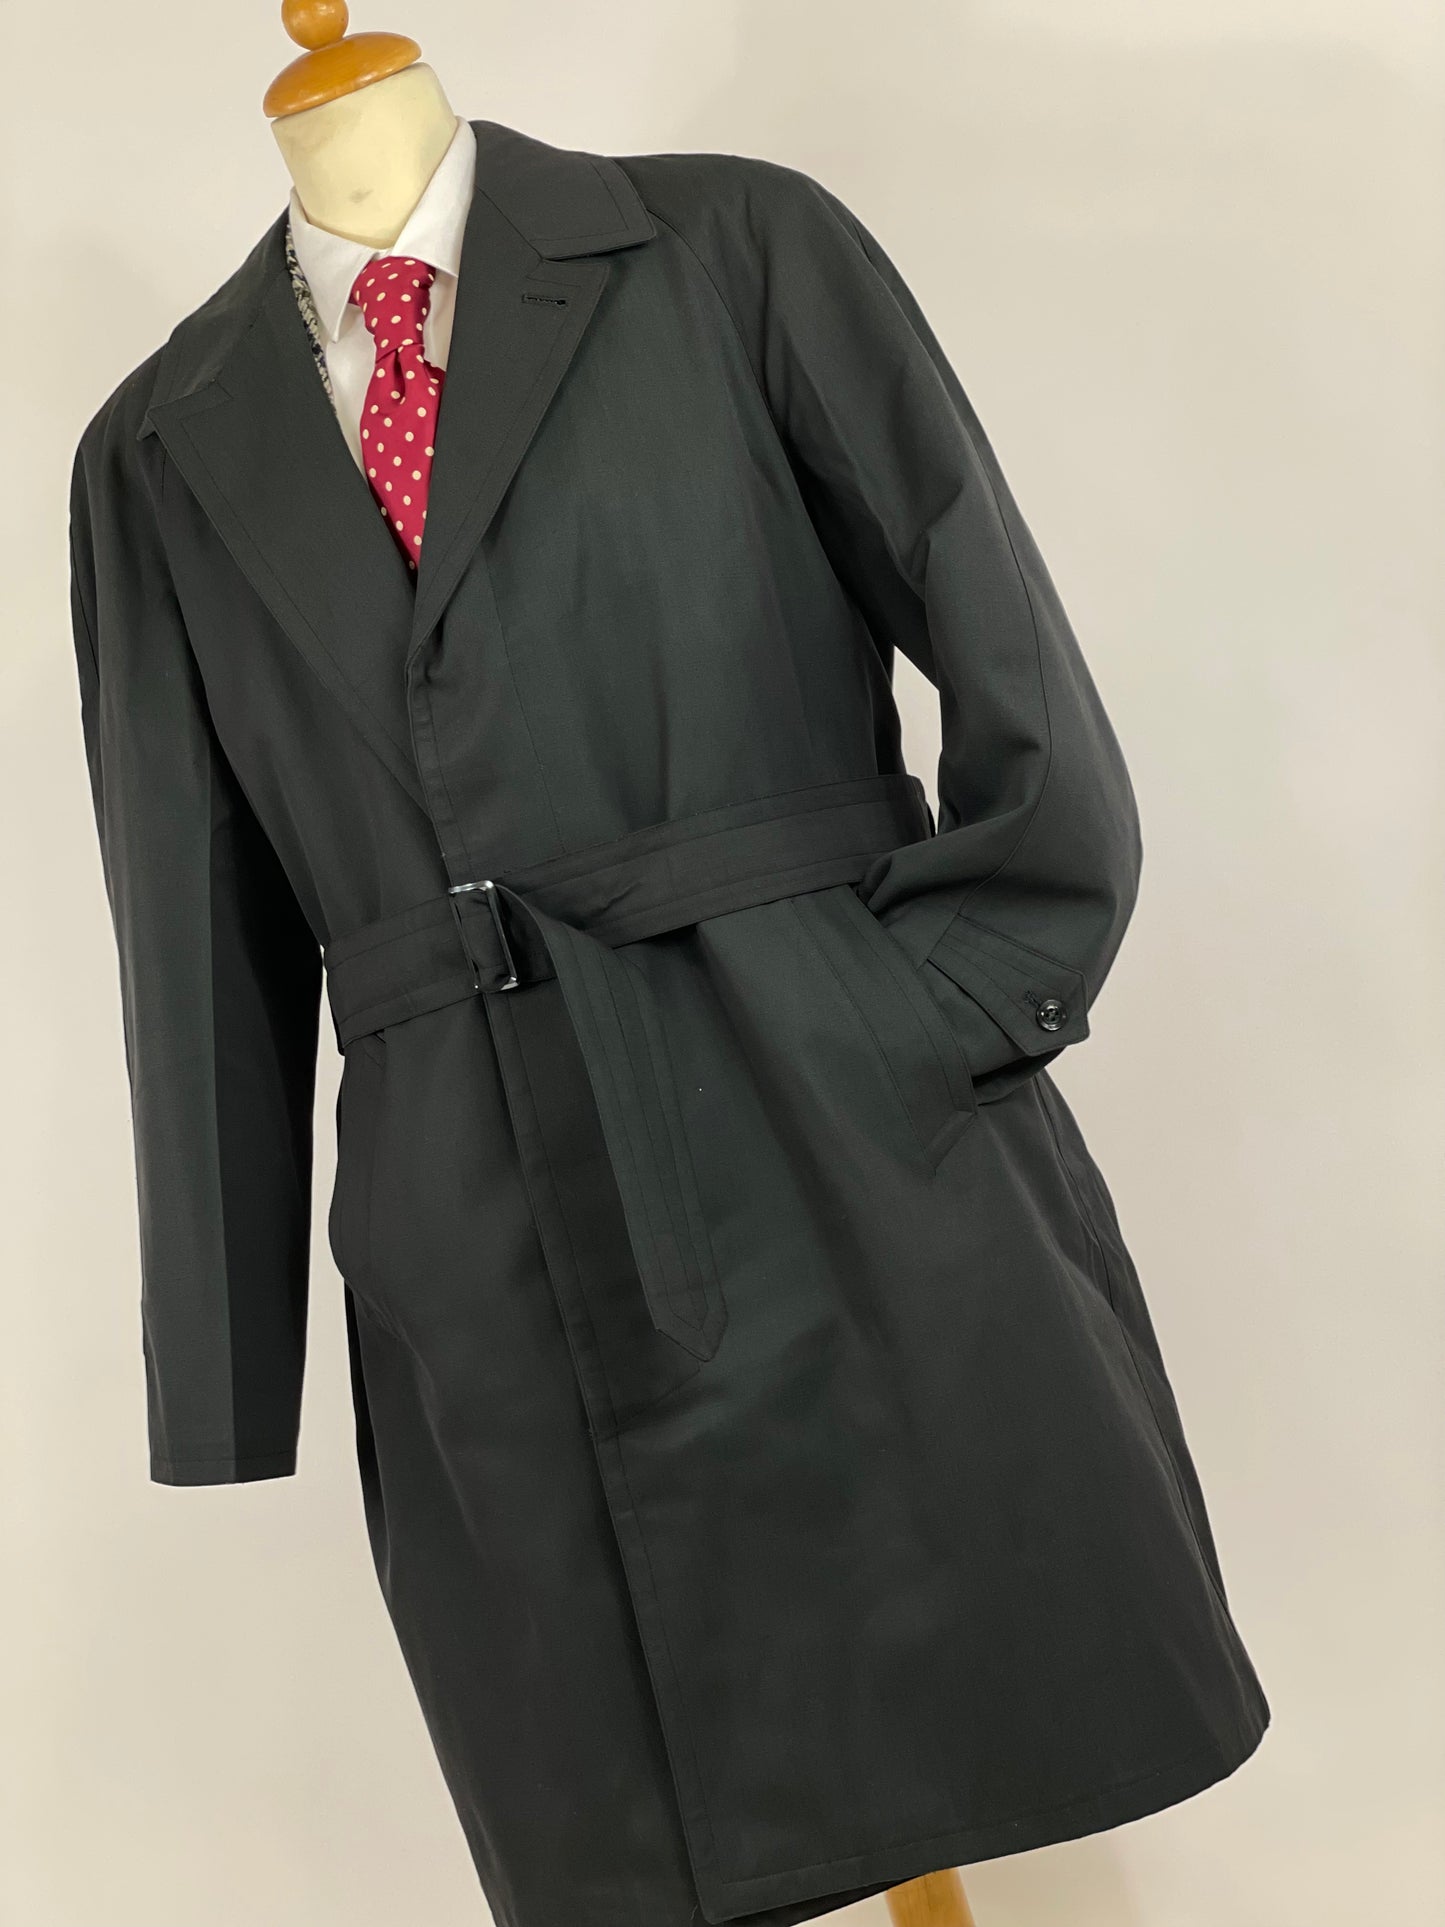 Firpe 1980s trench coat